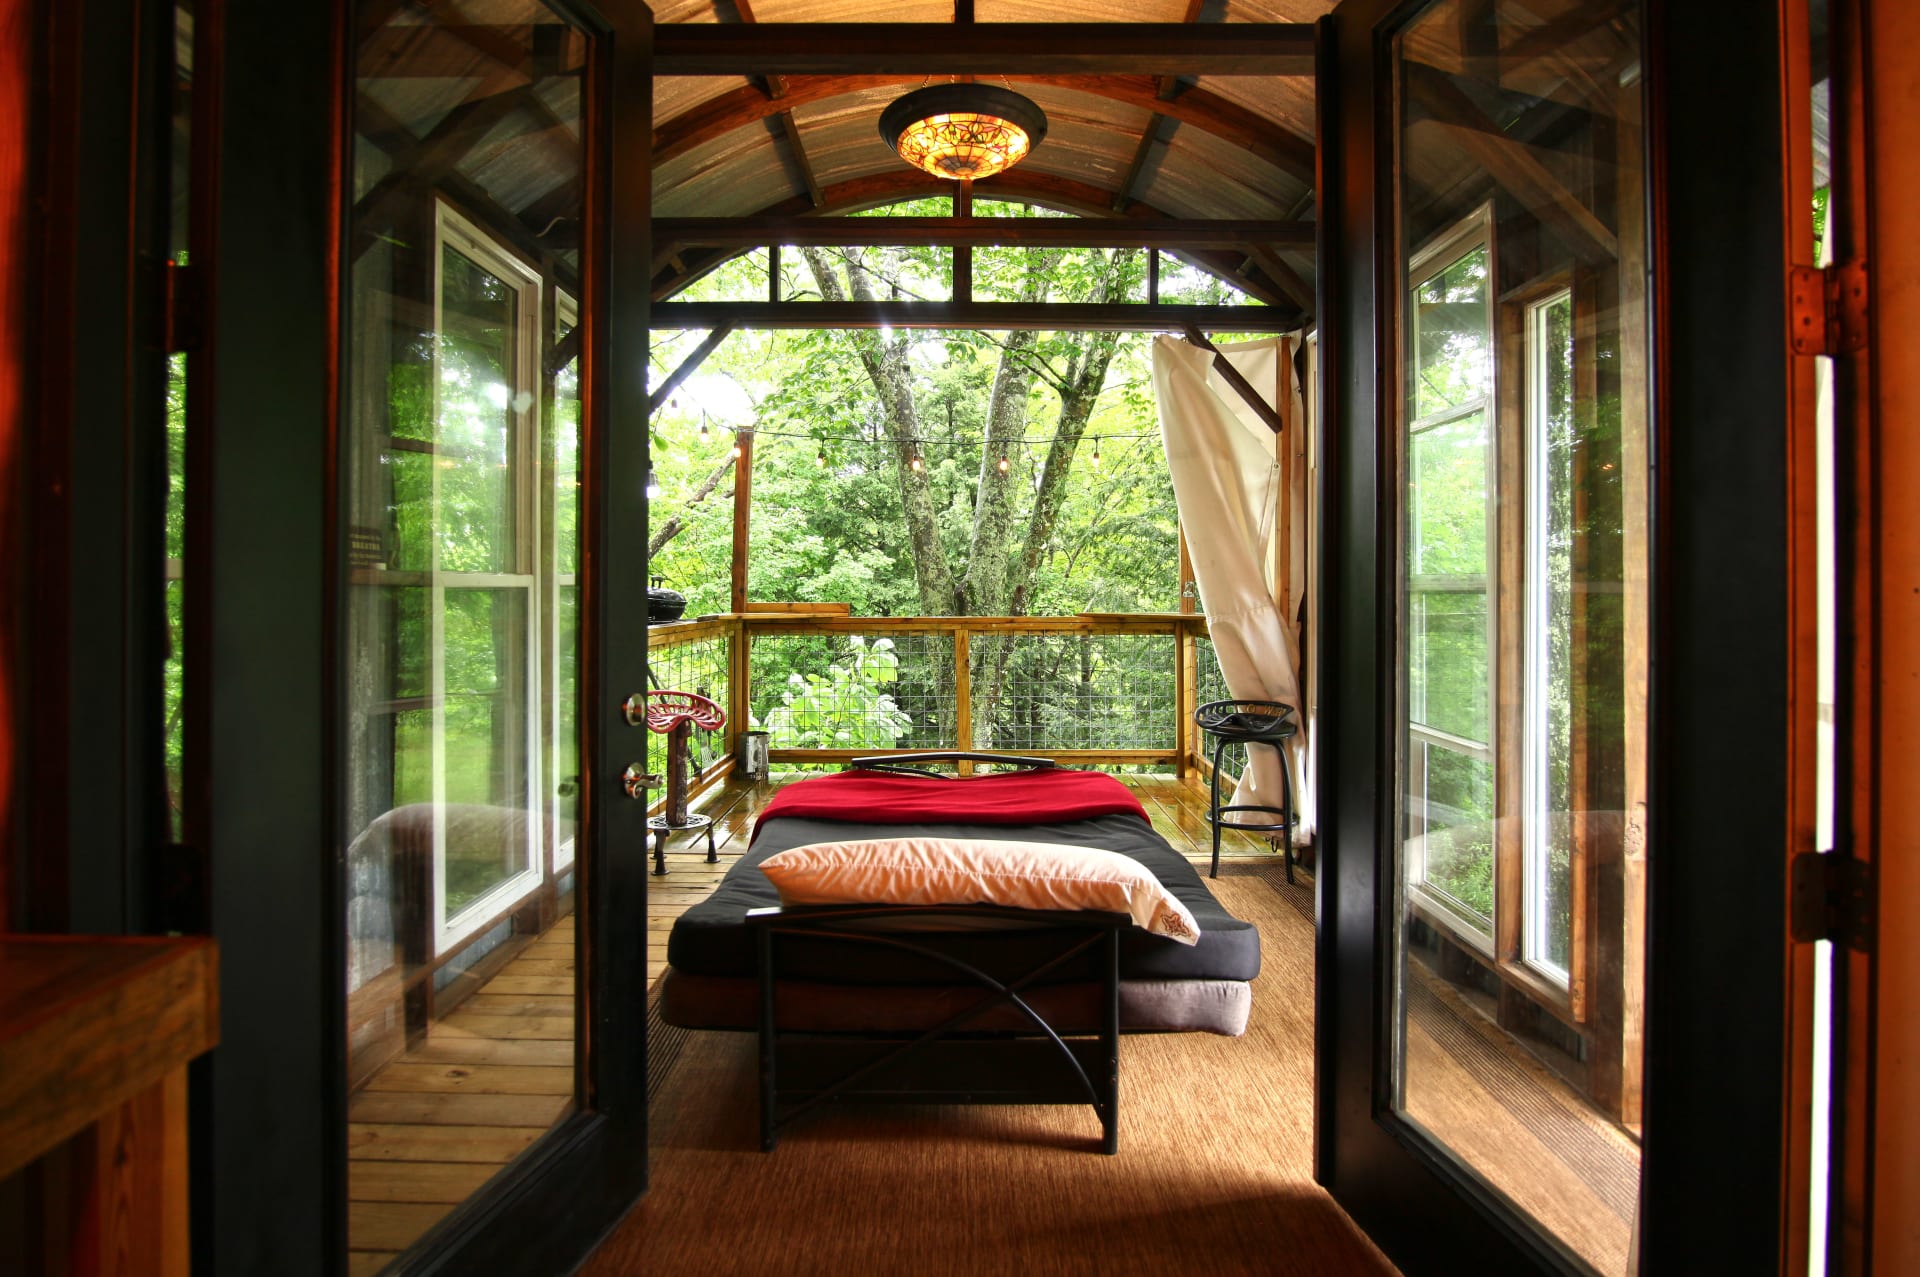 Magical indoor/outdoor sleeping space optimized for sounds of the waterfall.